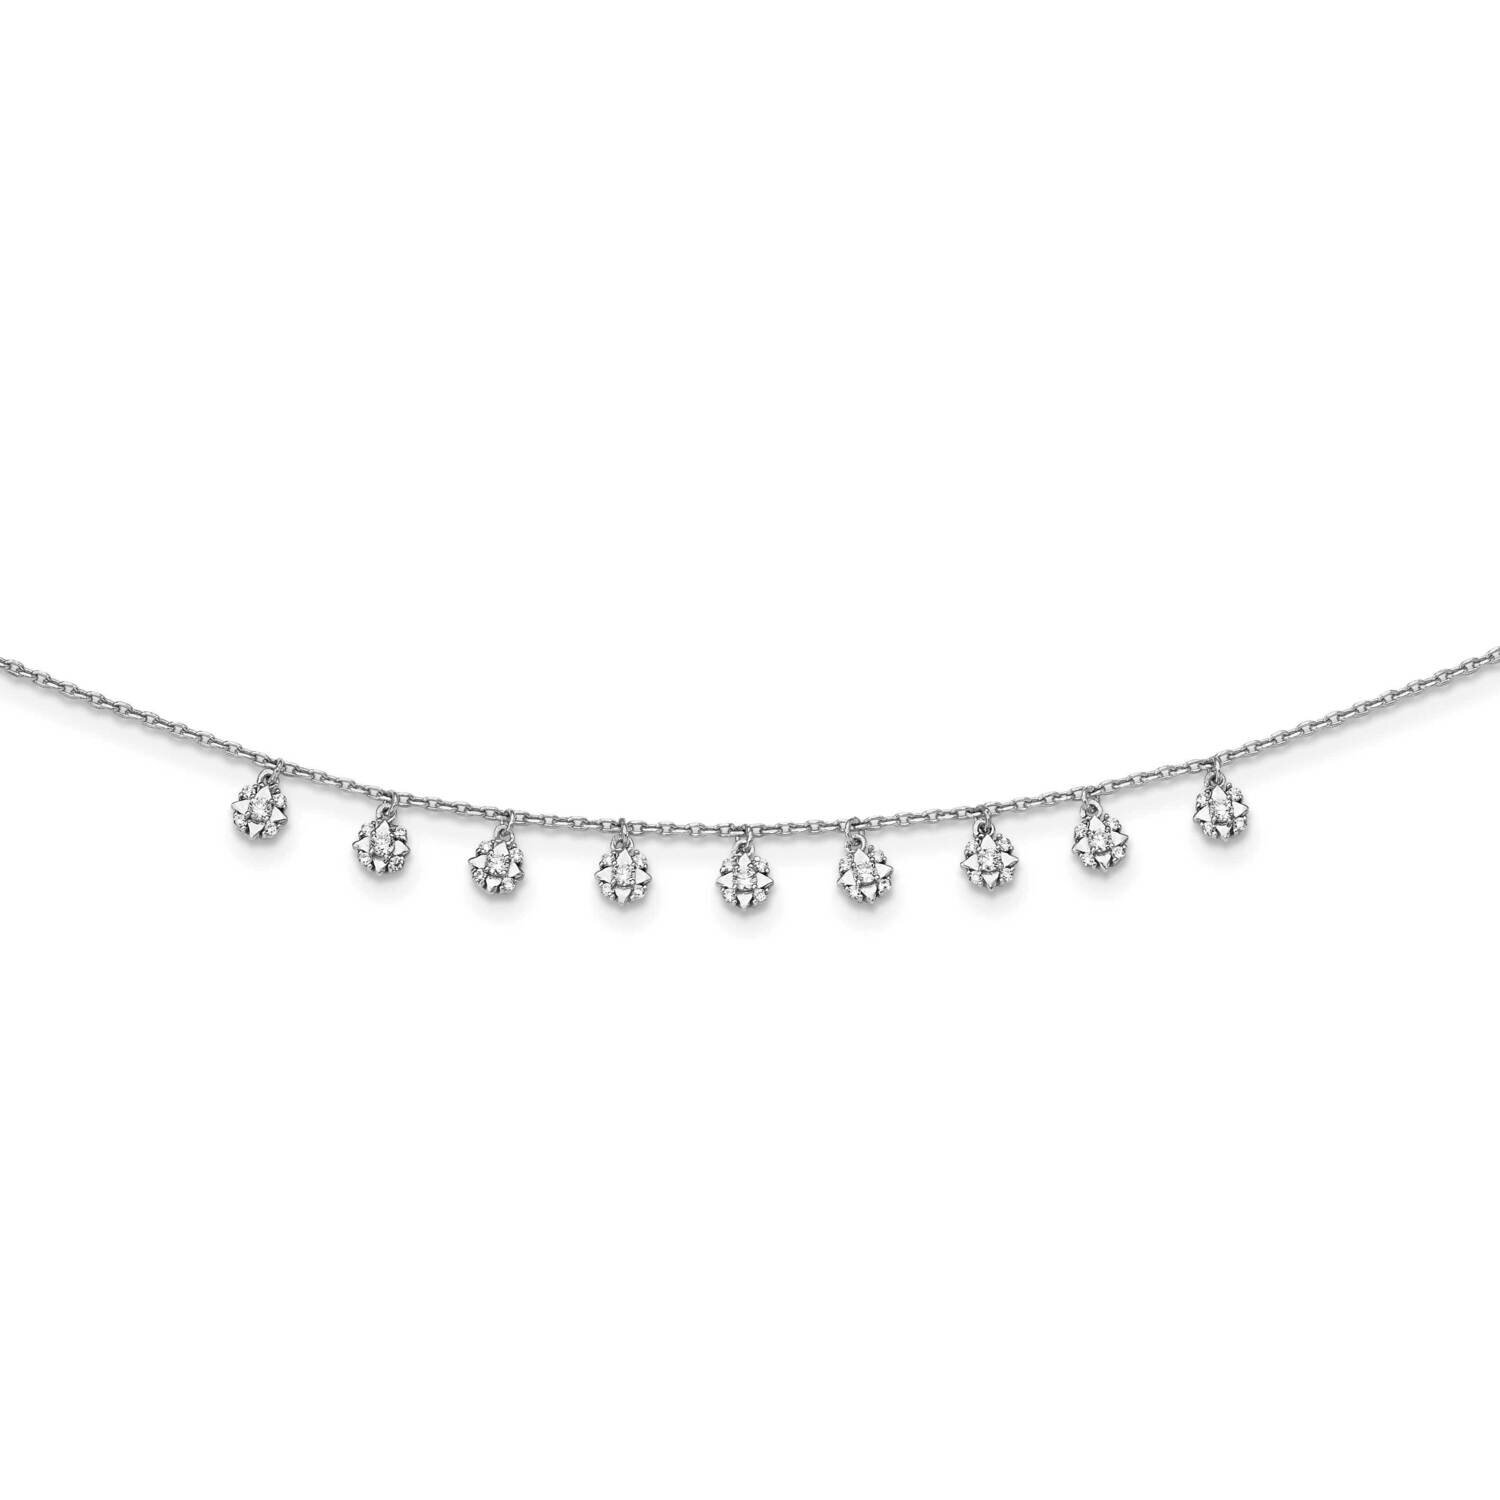 Cz Star Dangles 18 Inch Necklace Sterling Silver QG5634-18